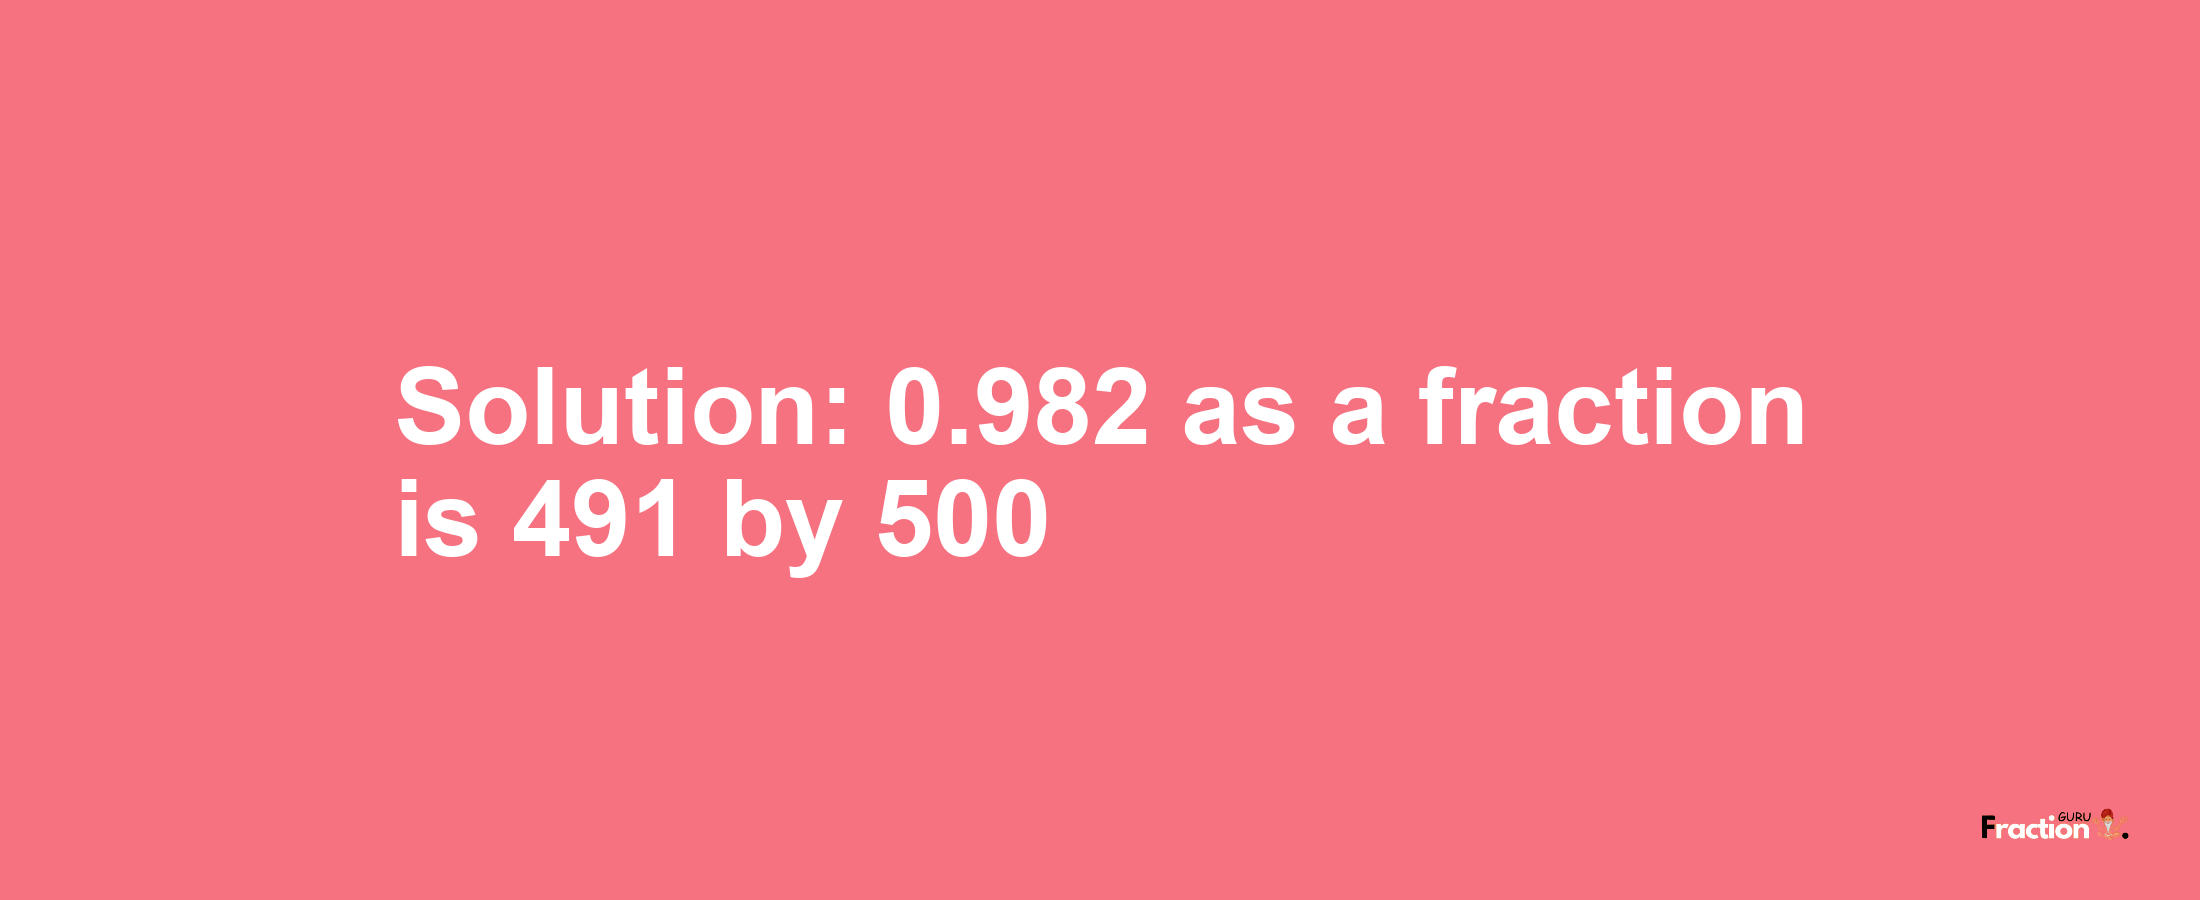 Solution:0.982 as a fraction is 491/500